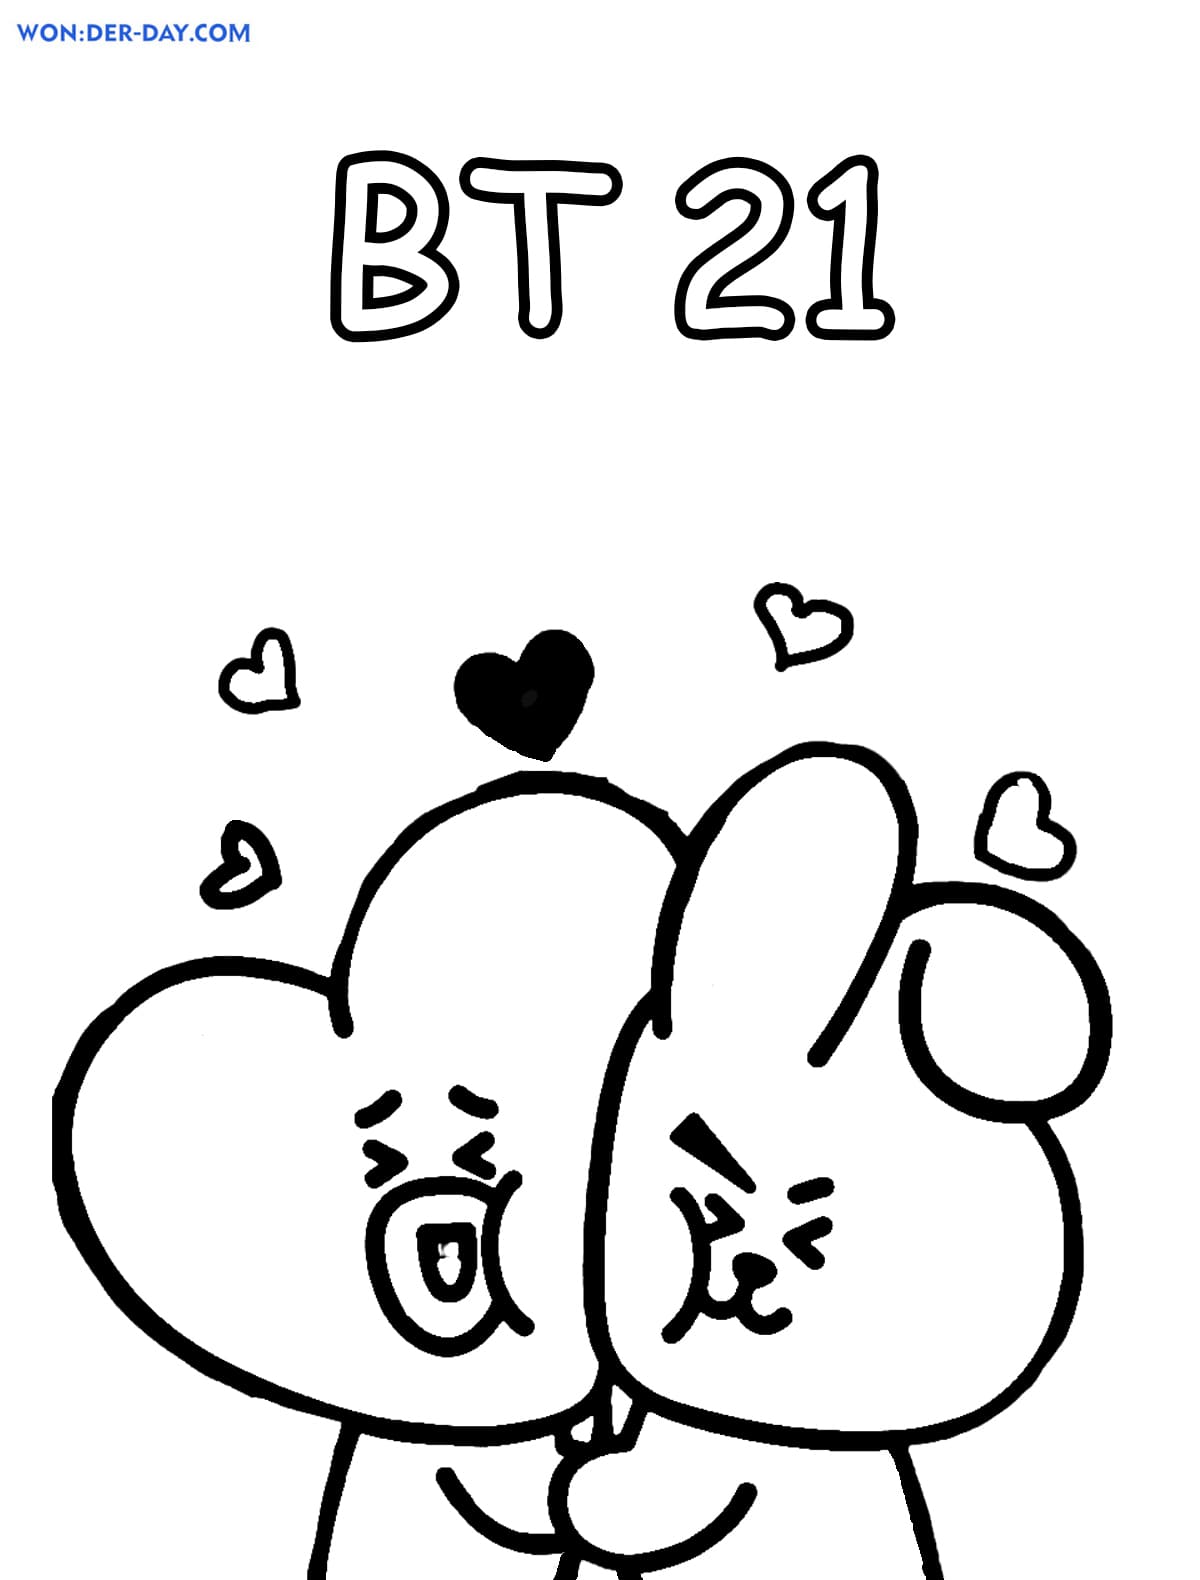 BTS BT21 RJ with Cooky and Shooky Hugs Sticker - Sticker Mania